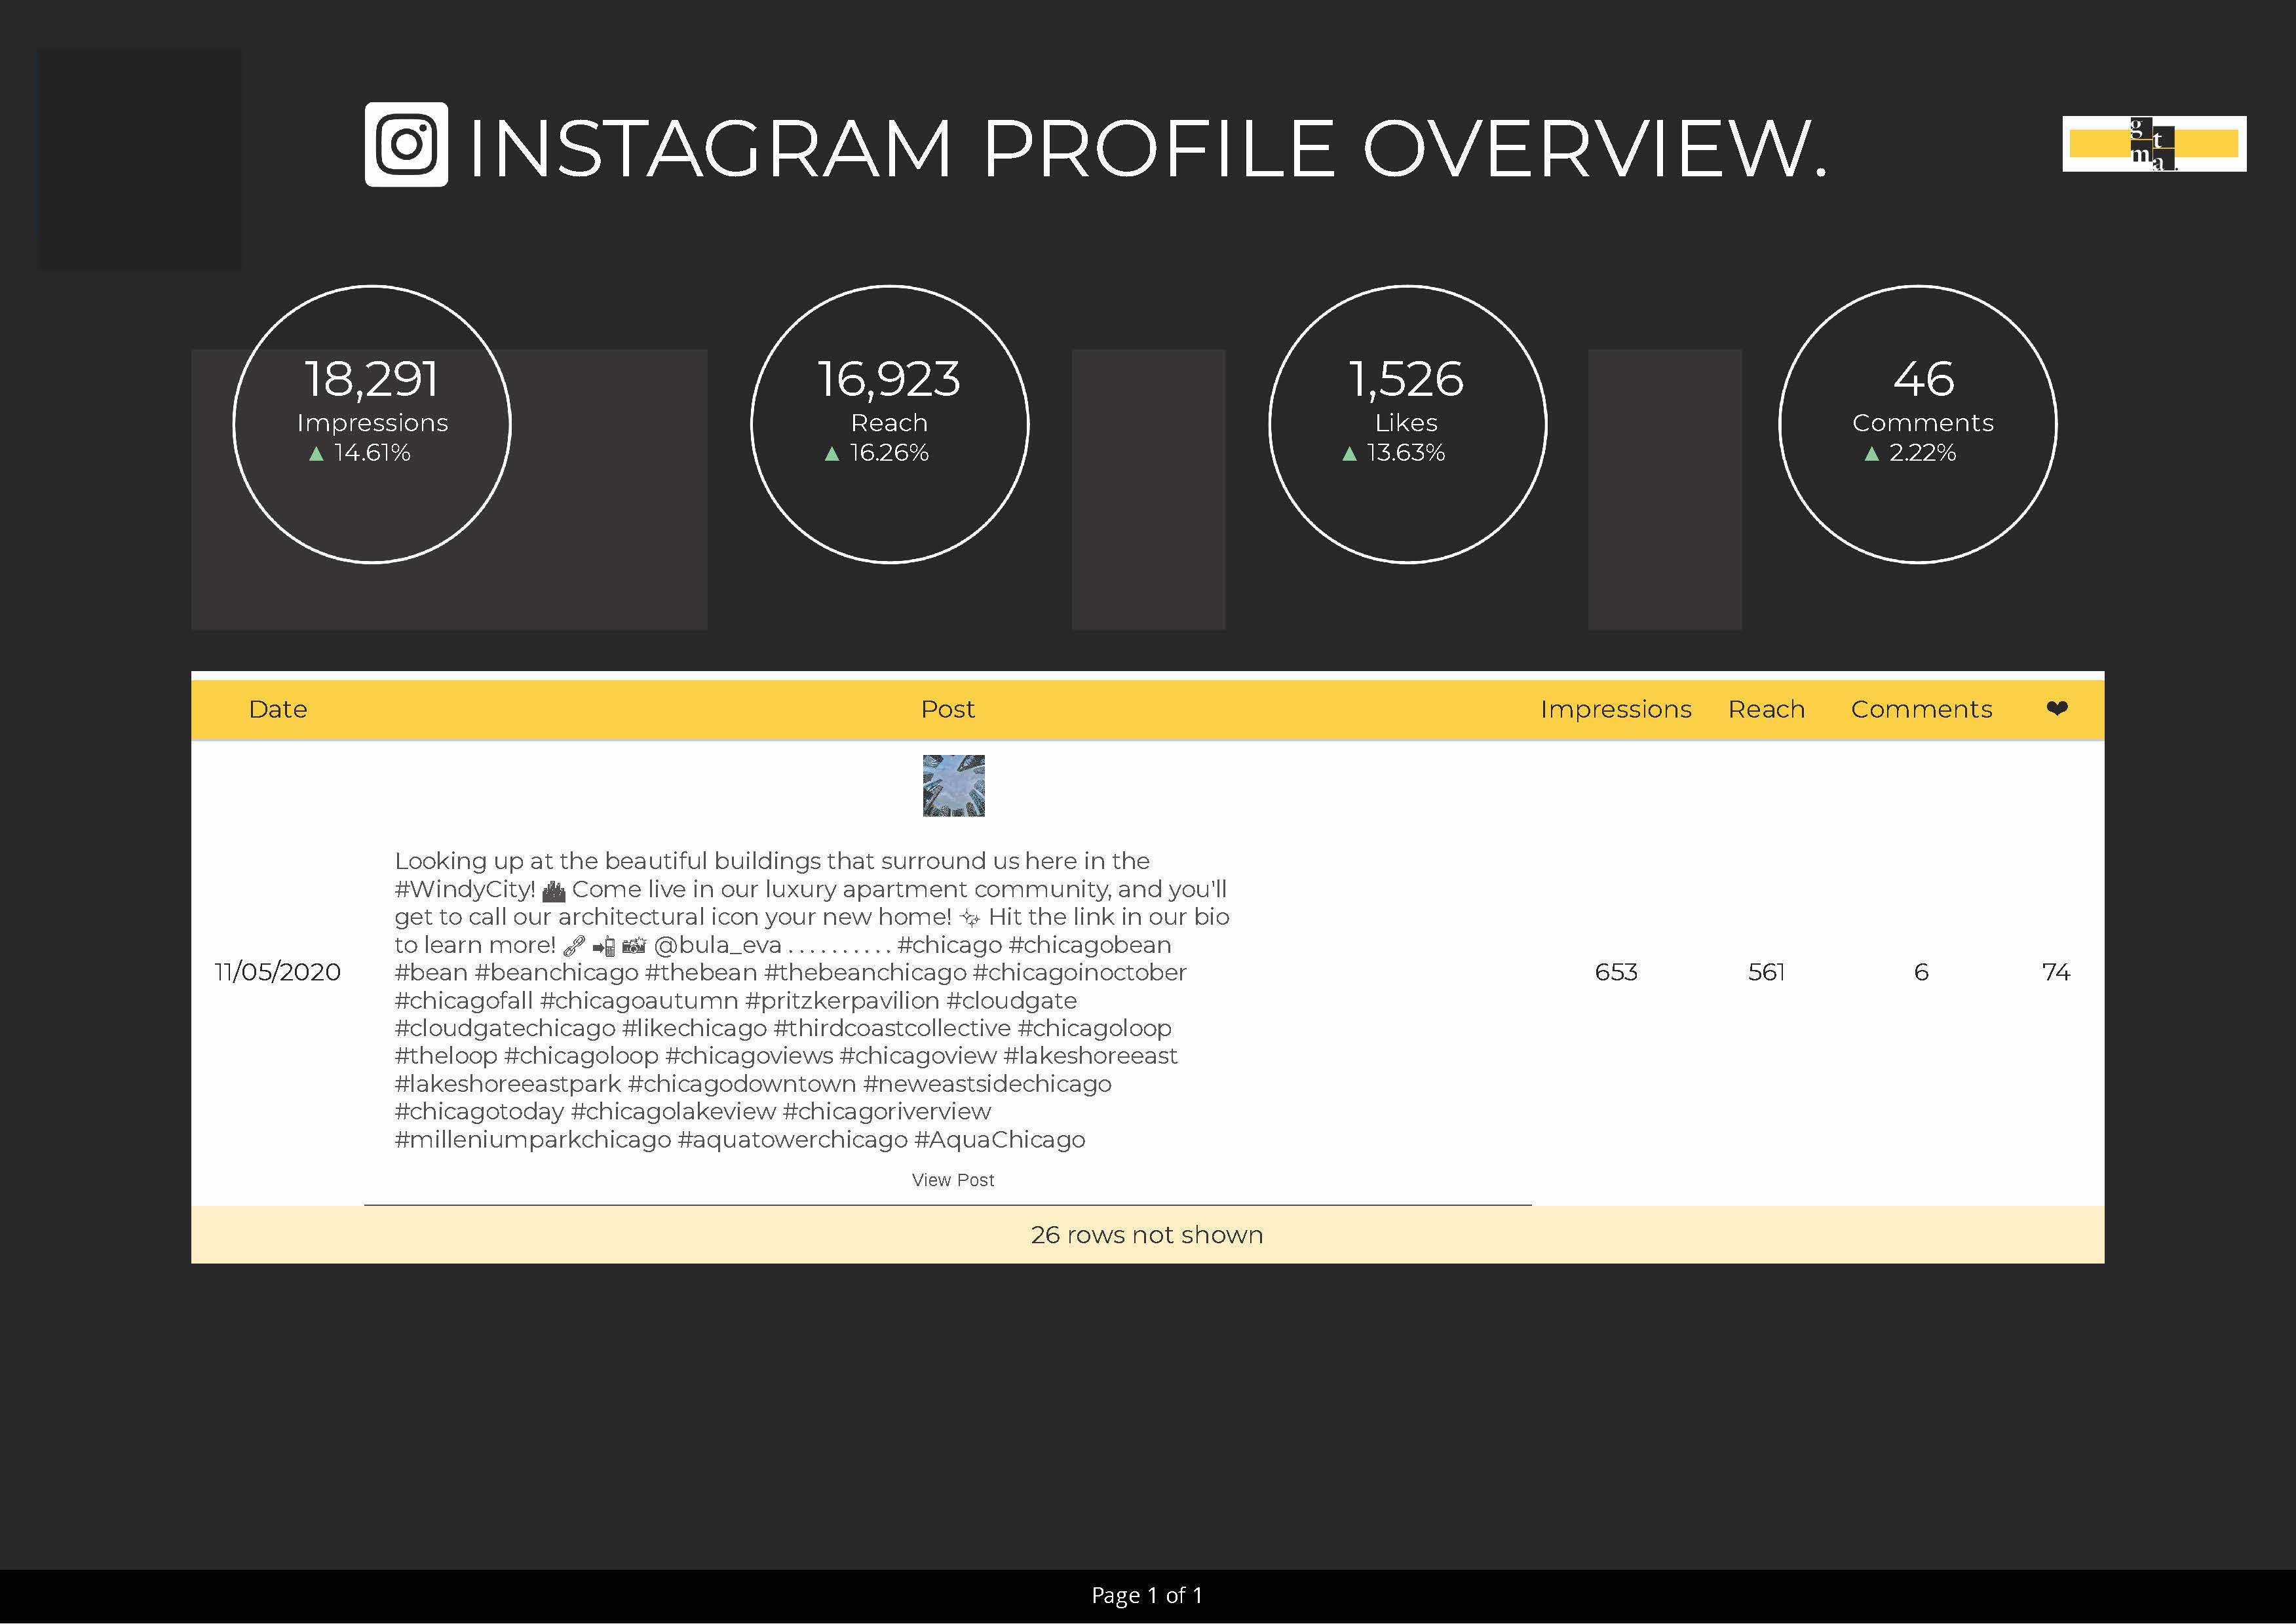 Instagram profile overview highlighting performance metrics such as impressions, reach, likes, and comments.